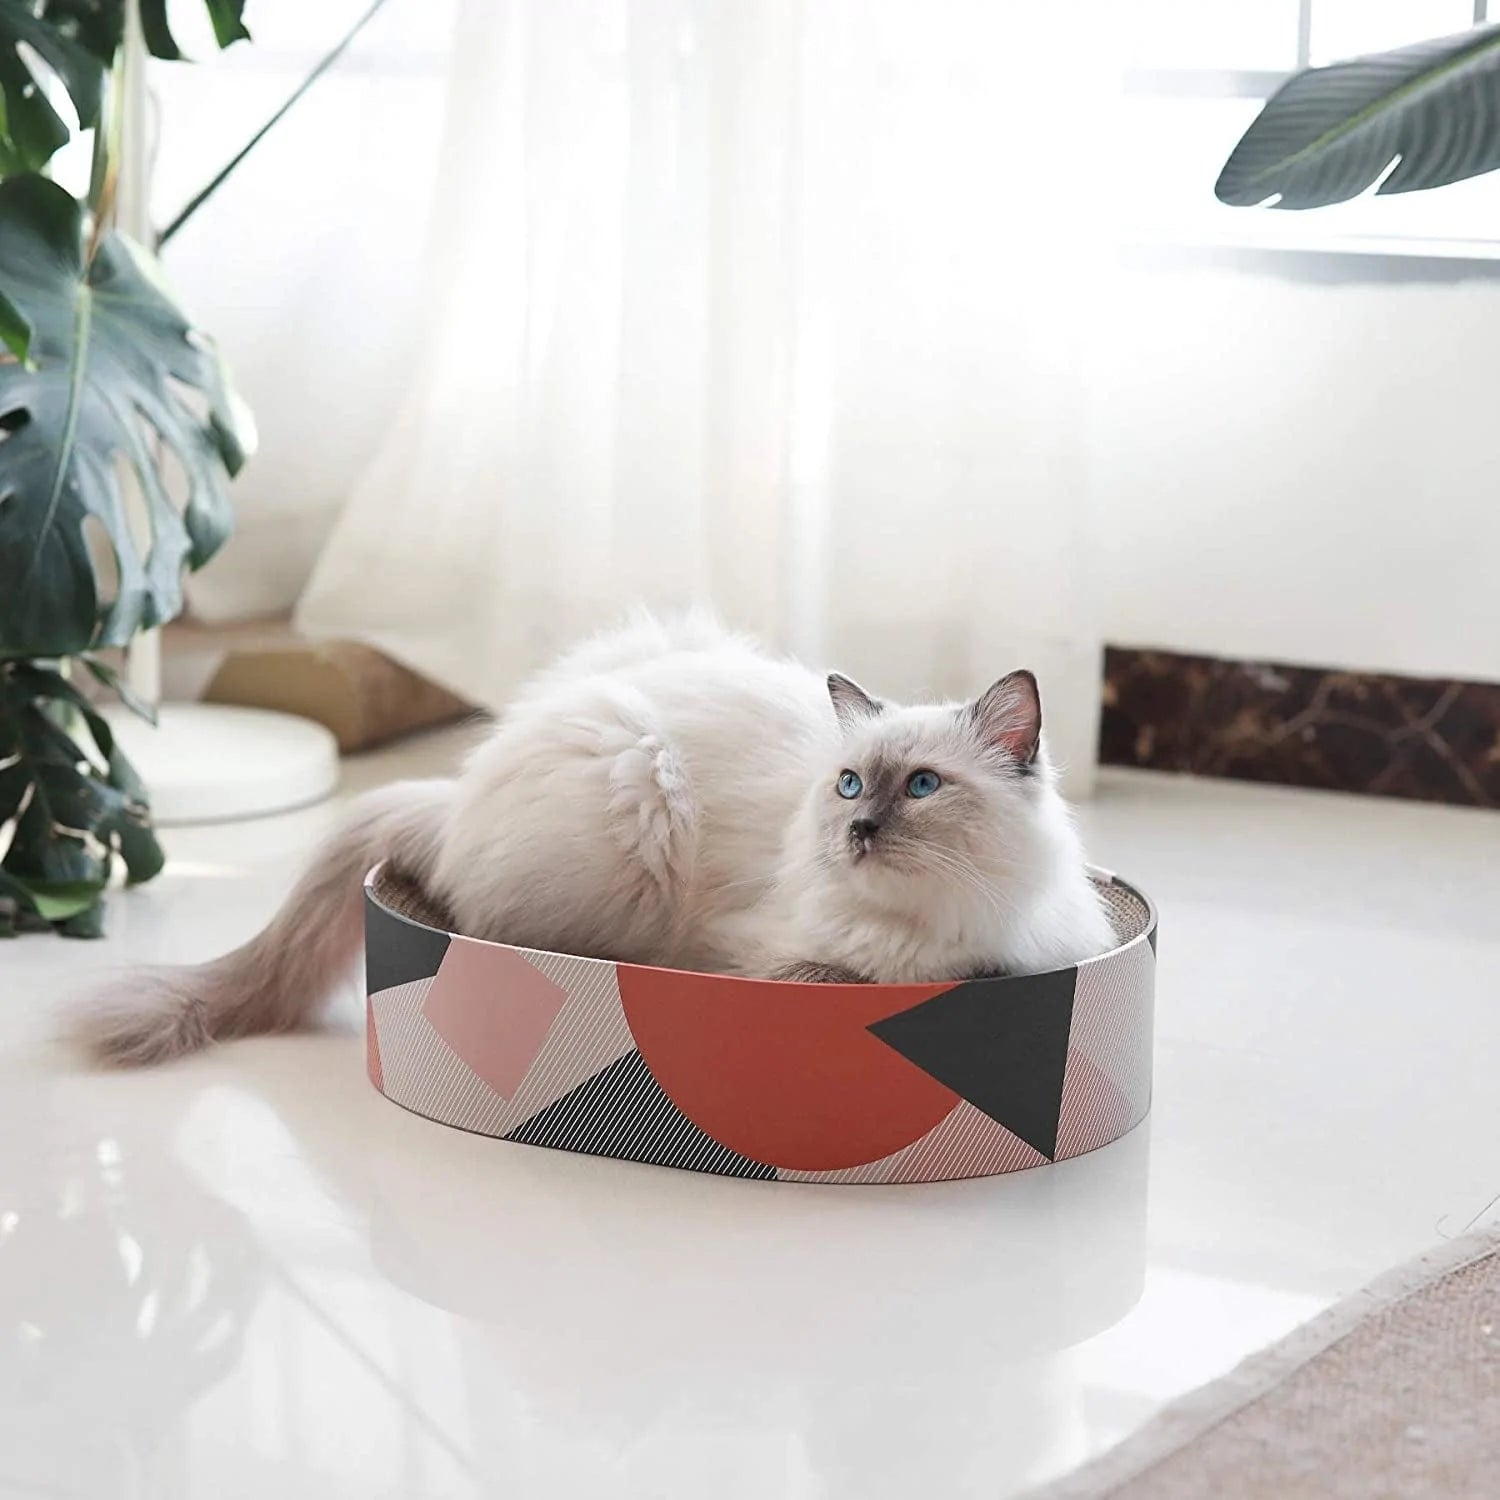 Comsaf Cat Scratcher Cardboard, Cat Bed, Lounge Bed for Cats, Corrugated Scratch Padfor Furniture Protection